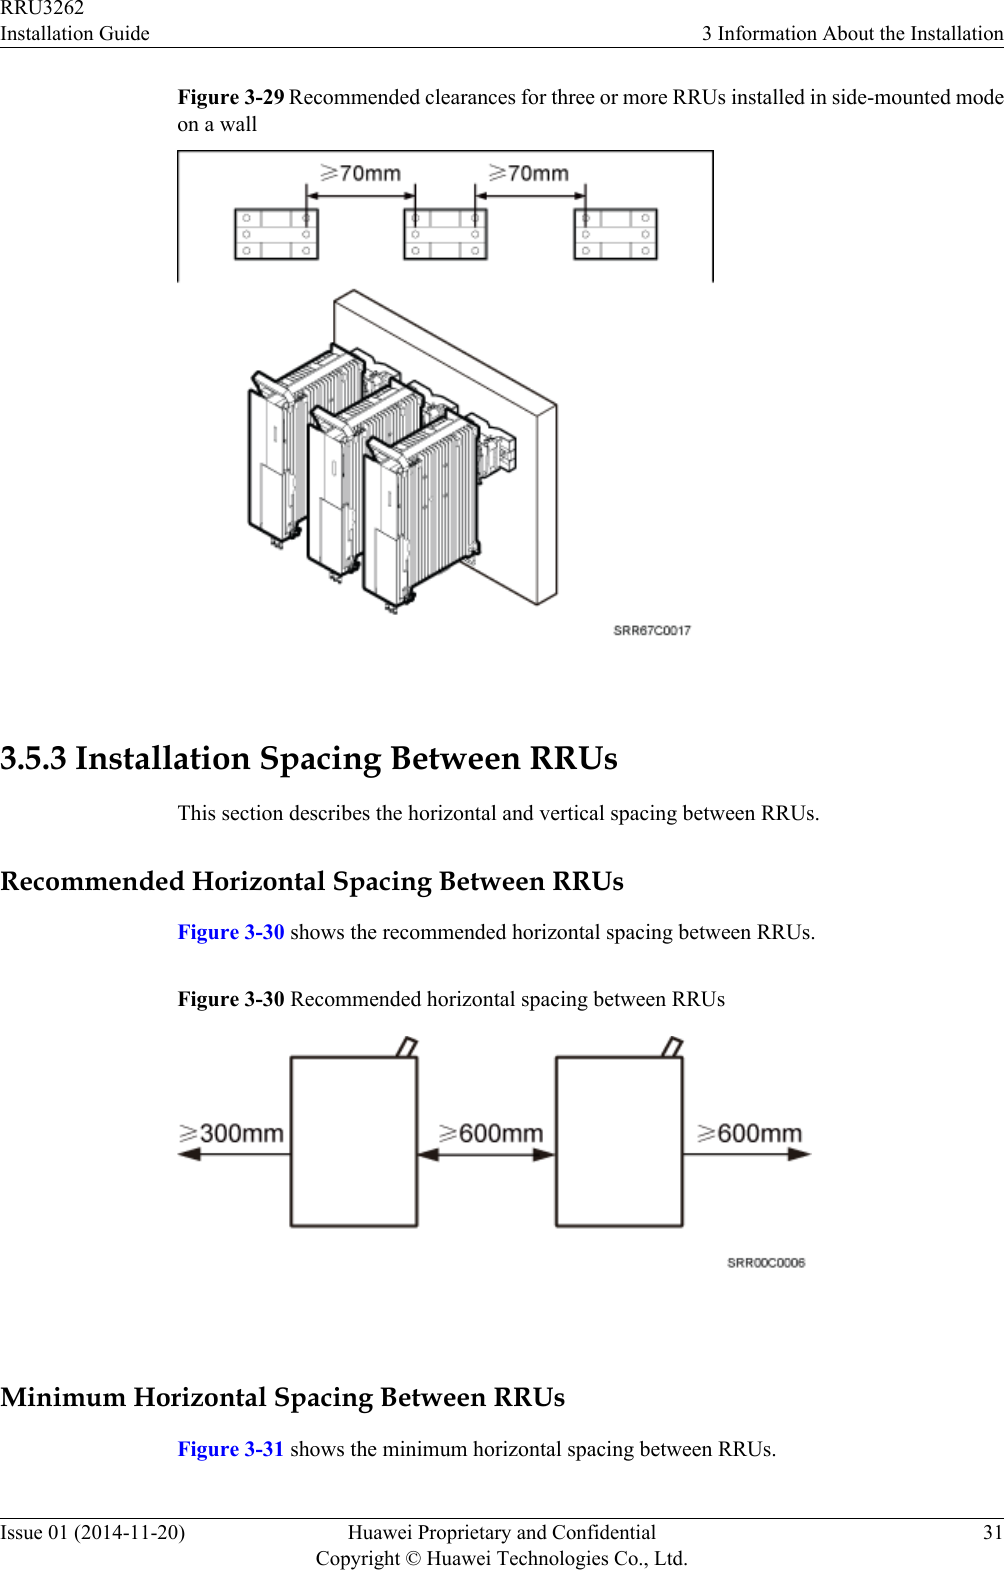 Figure 3-29 Recommended clearances for three or more RRUs installed in side-mounted modeon a wall 3.5.3 Installation Spacing Between RRUsThis section describes the horizontal and vertical spacing between RRUs.Recommended Horizontal Spacing Between RRUsFigure 3-30 shows the recommended horizontal spacing between RRUs.Figure 3-30 Recommended horizontal spacing between RRUs Minimum Horizontal Spacing Between RRUsFigure 3-31 shows the minimum horizontal spacing between RRUs.RRU3262Installation Guide 3 Information About the InstallationIssue 01 (2014-11-20) Huawei Proprietary and ConfidentialCopyright © Huawei Technologies Co., Ltd.31